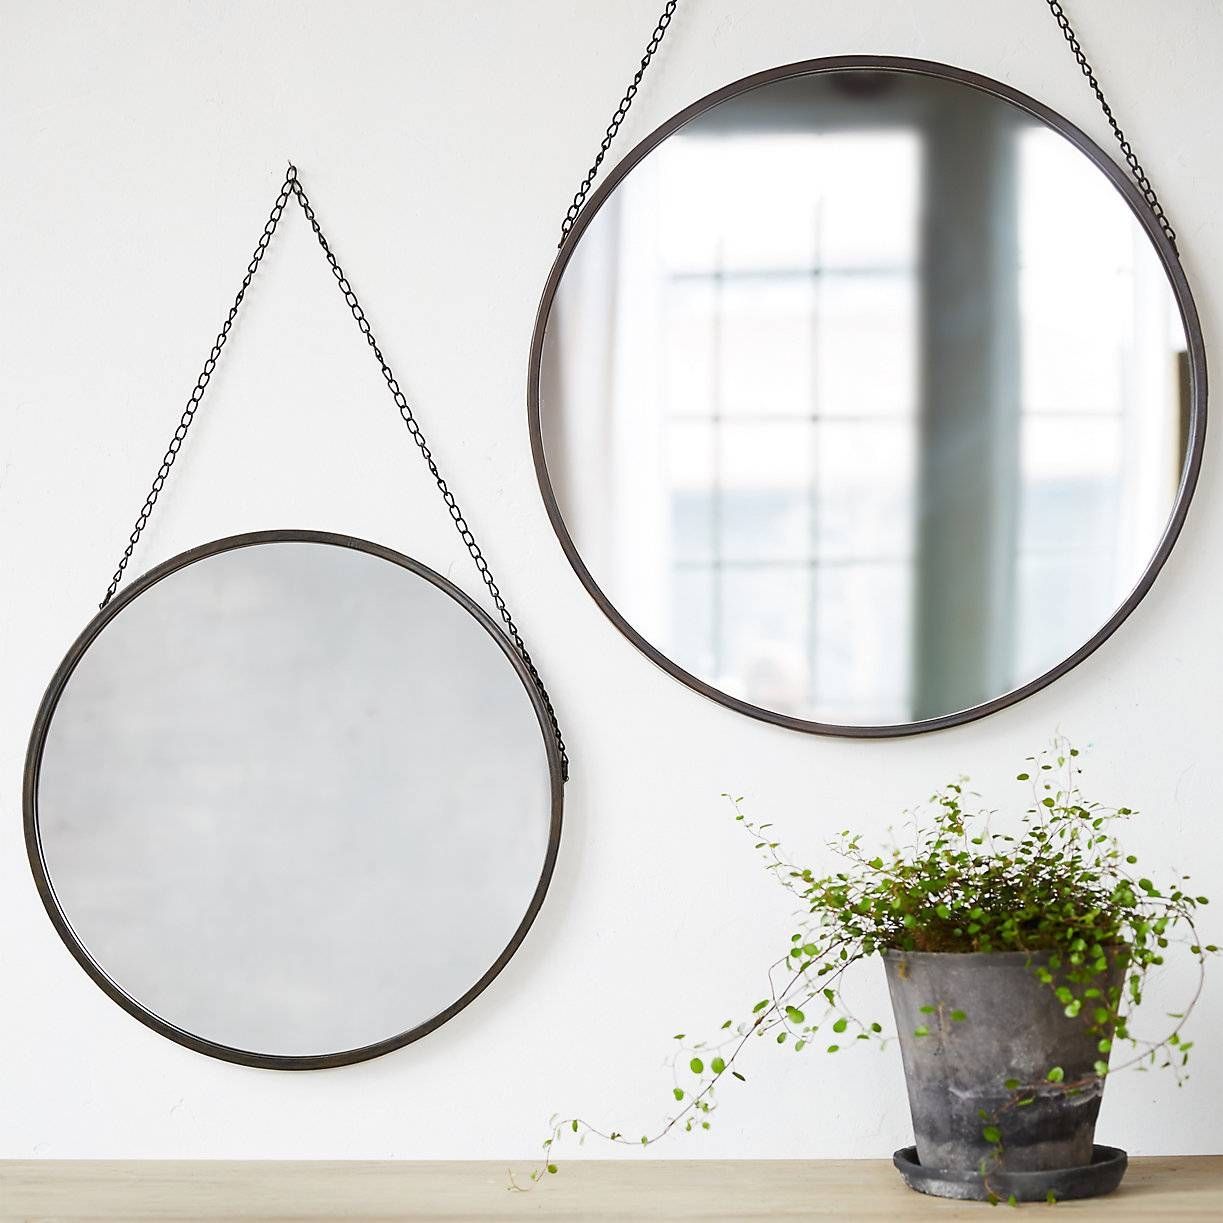 15 Best Ideas of Mirrors Circles for Walls